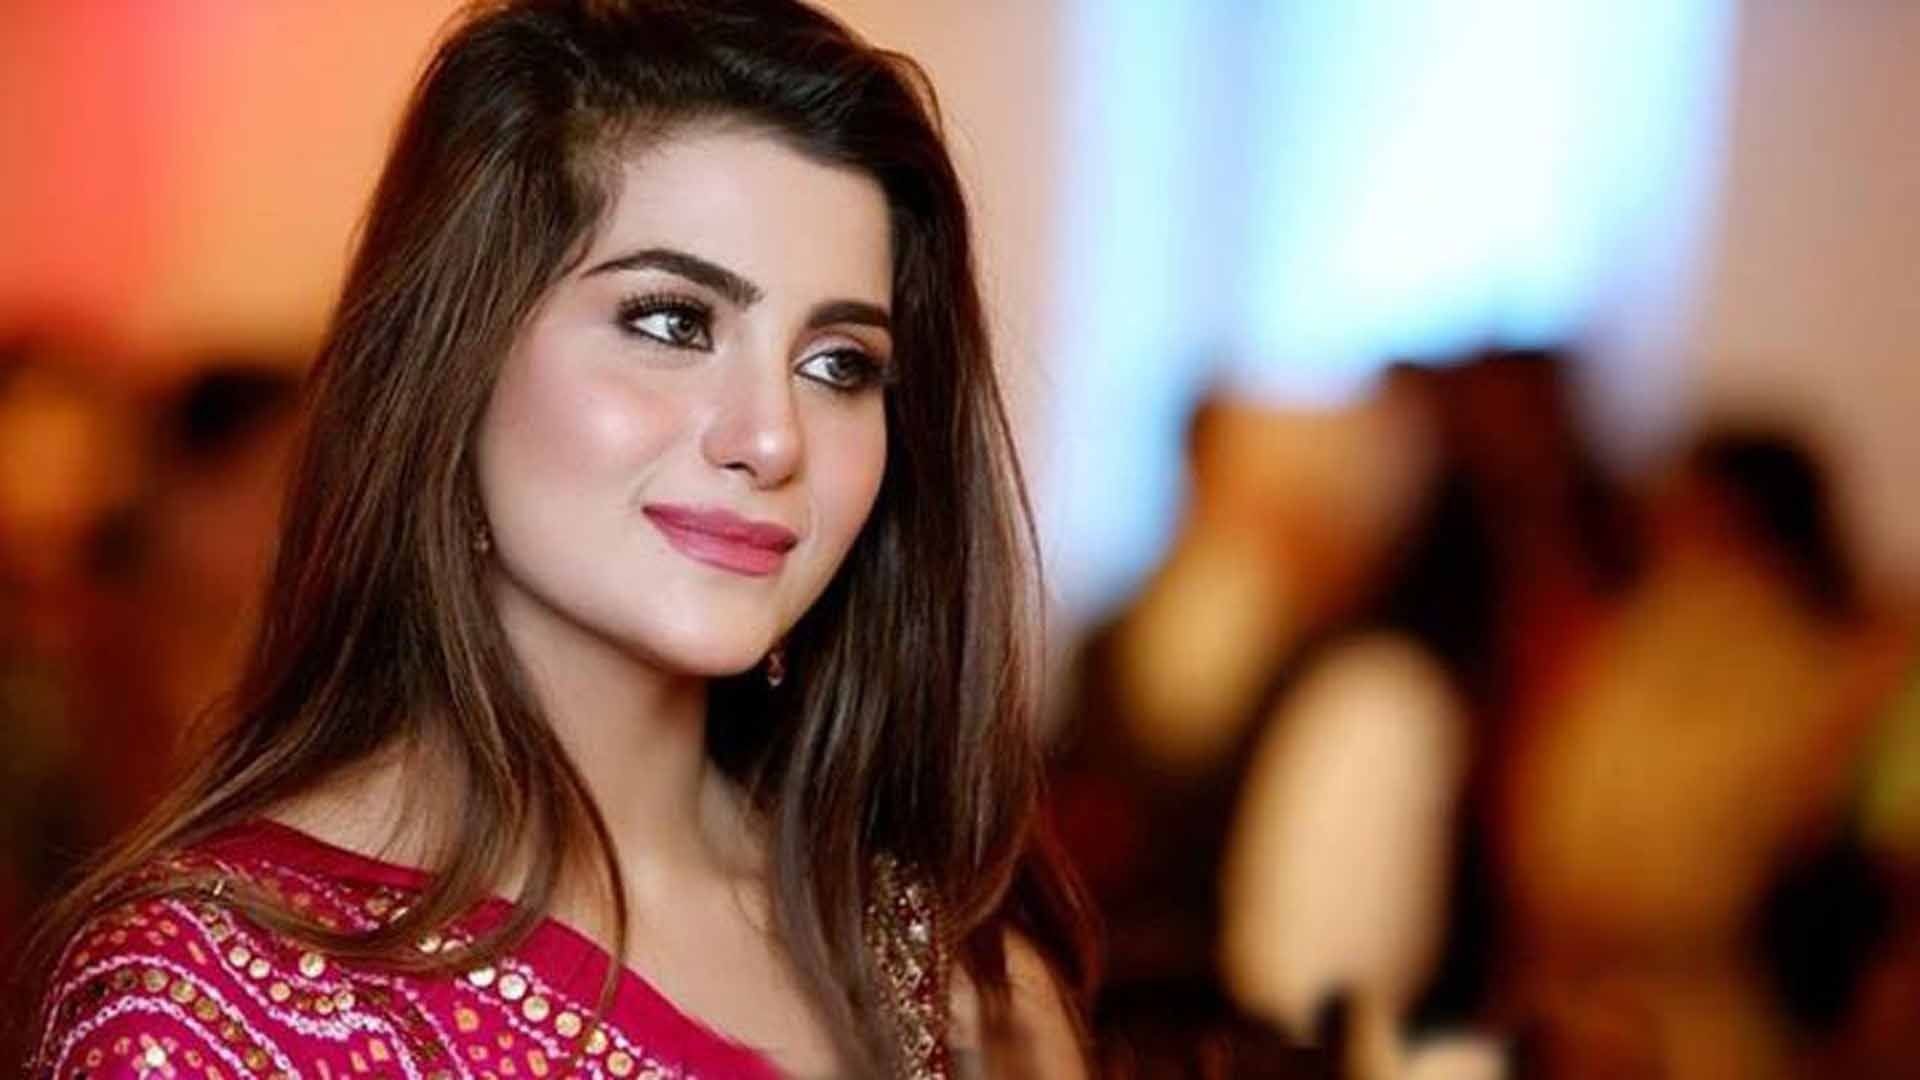 1920x1080  Pakistani girl wallpaper hd 1080p, images, photos and pics mobile